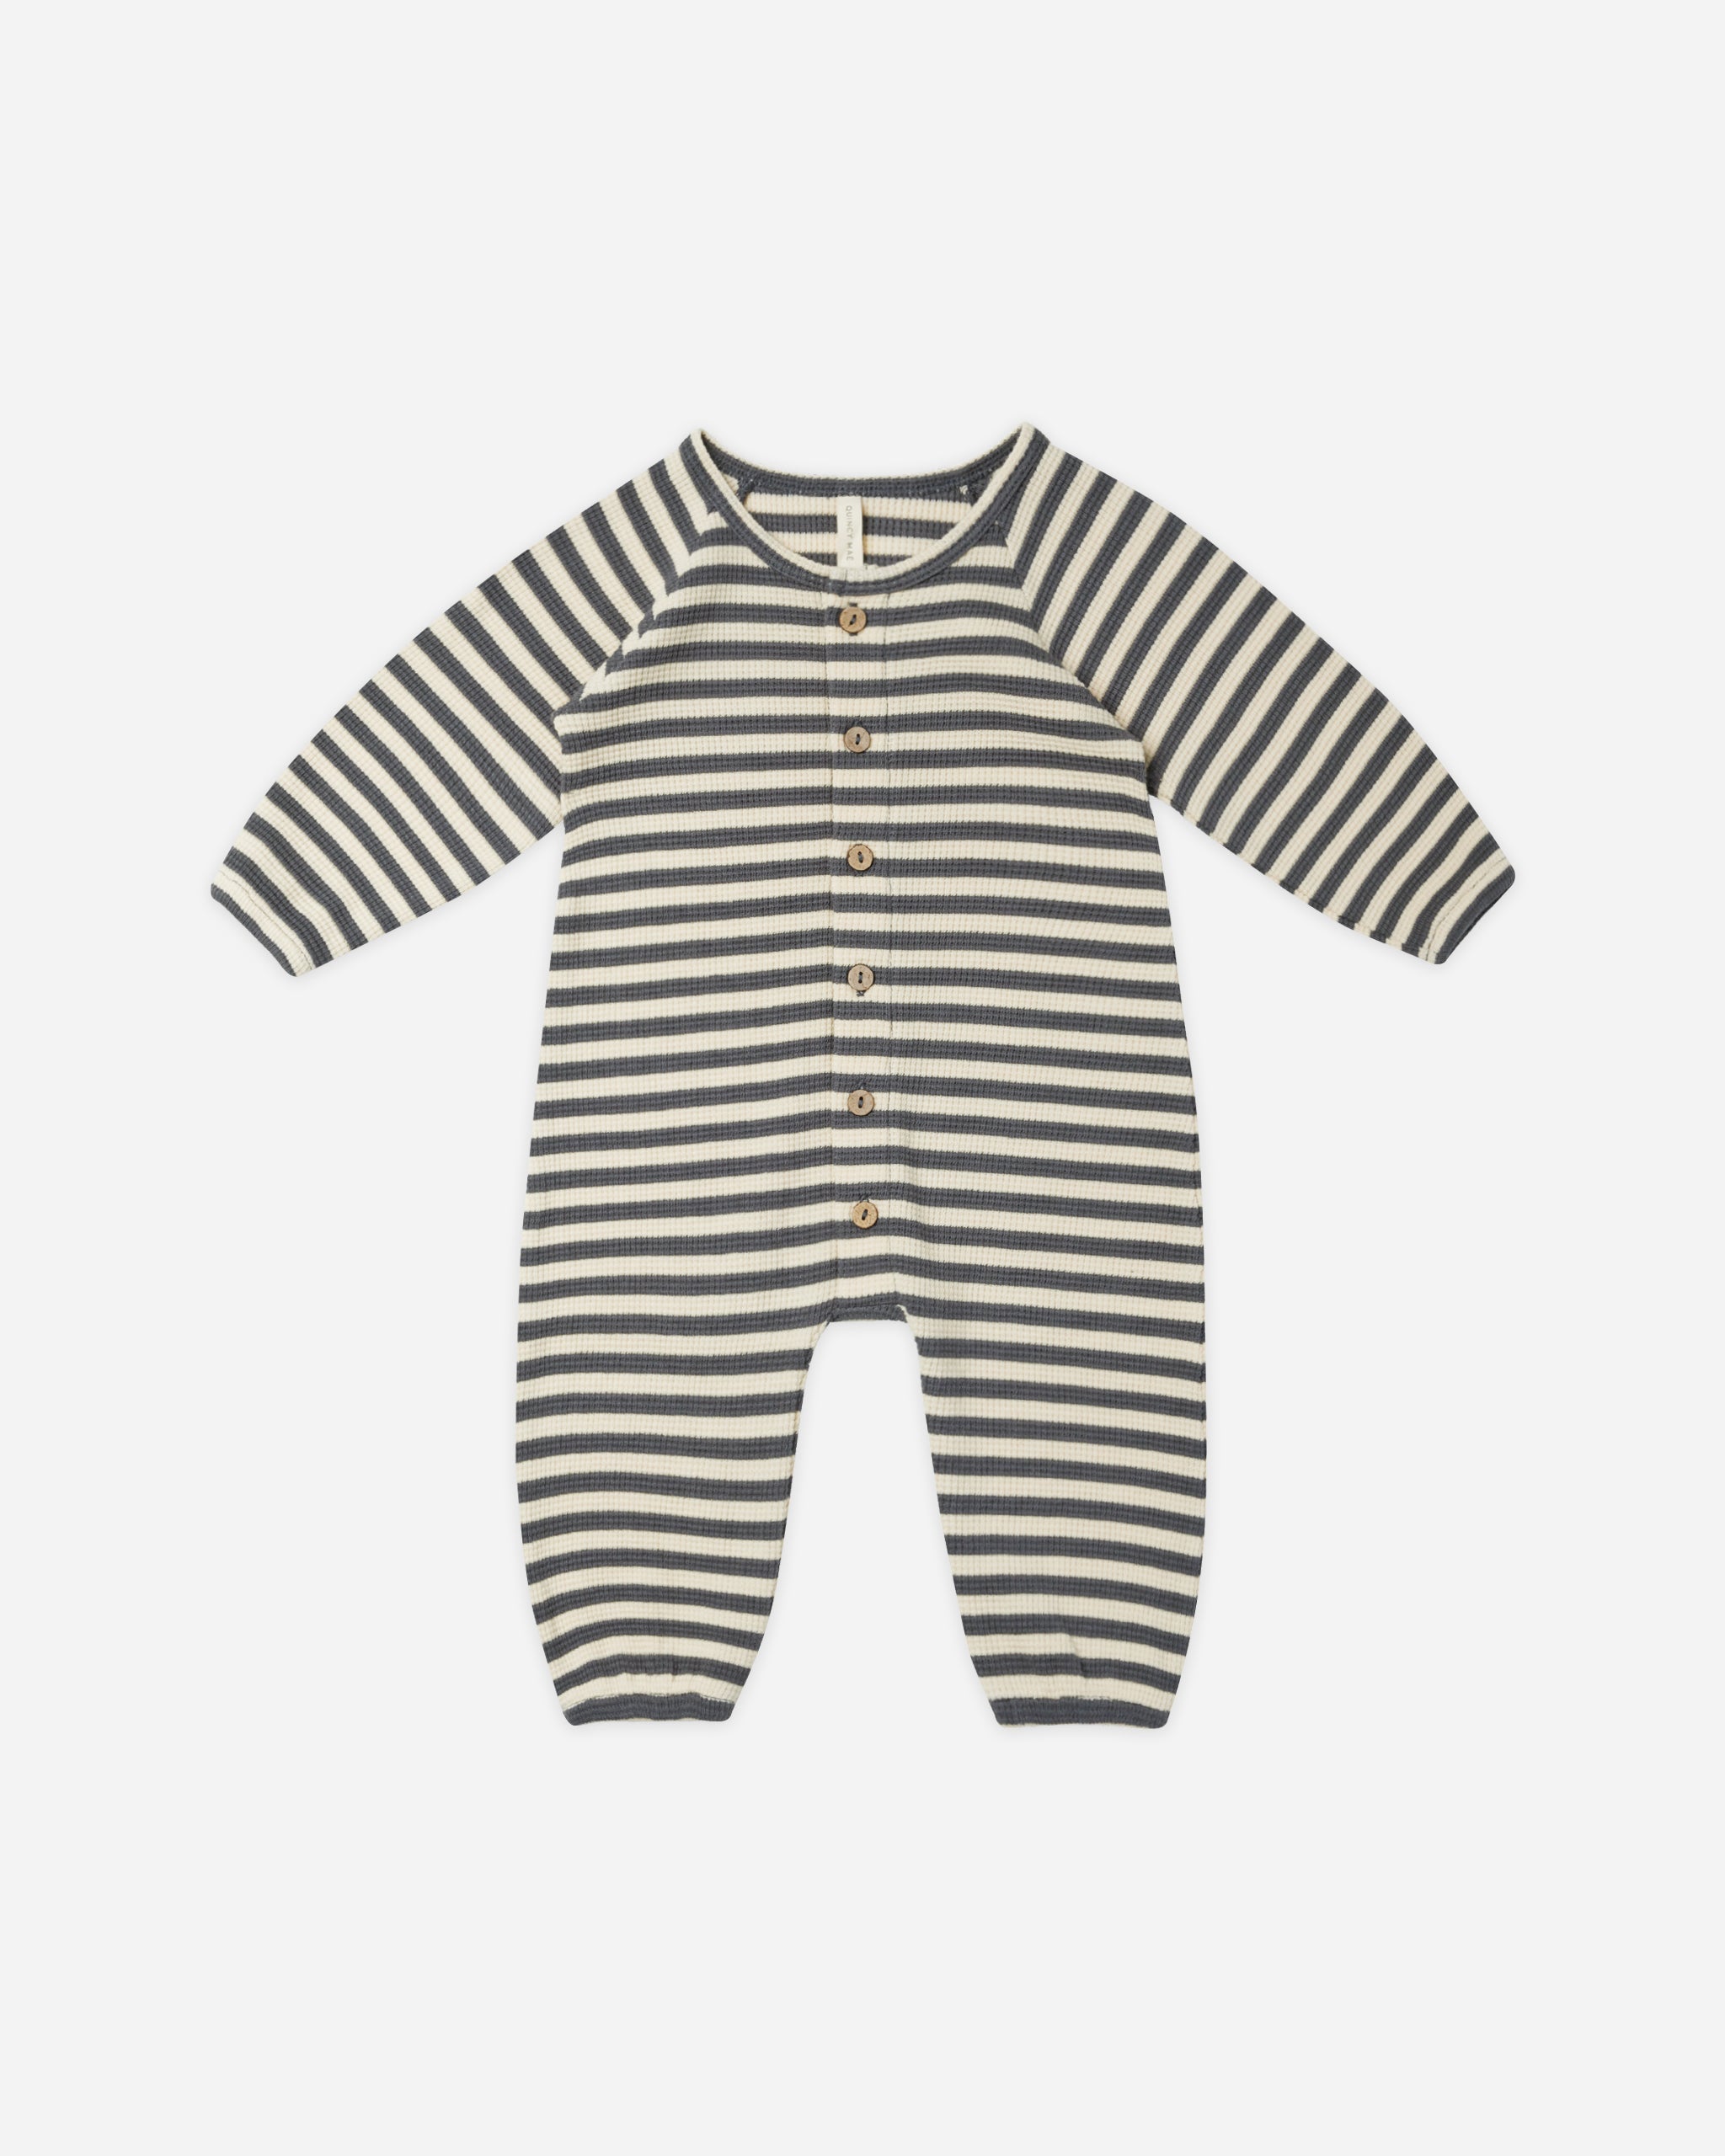 Waffle Long Sleeve Jumpsuit || Navy Stripe - Rylee + Cru | Kids Clothes | Trendy Baby Clothes | Modern Infant Outfits |